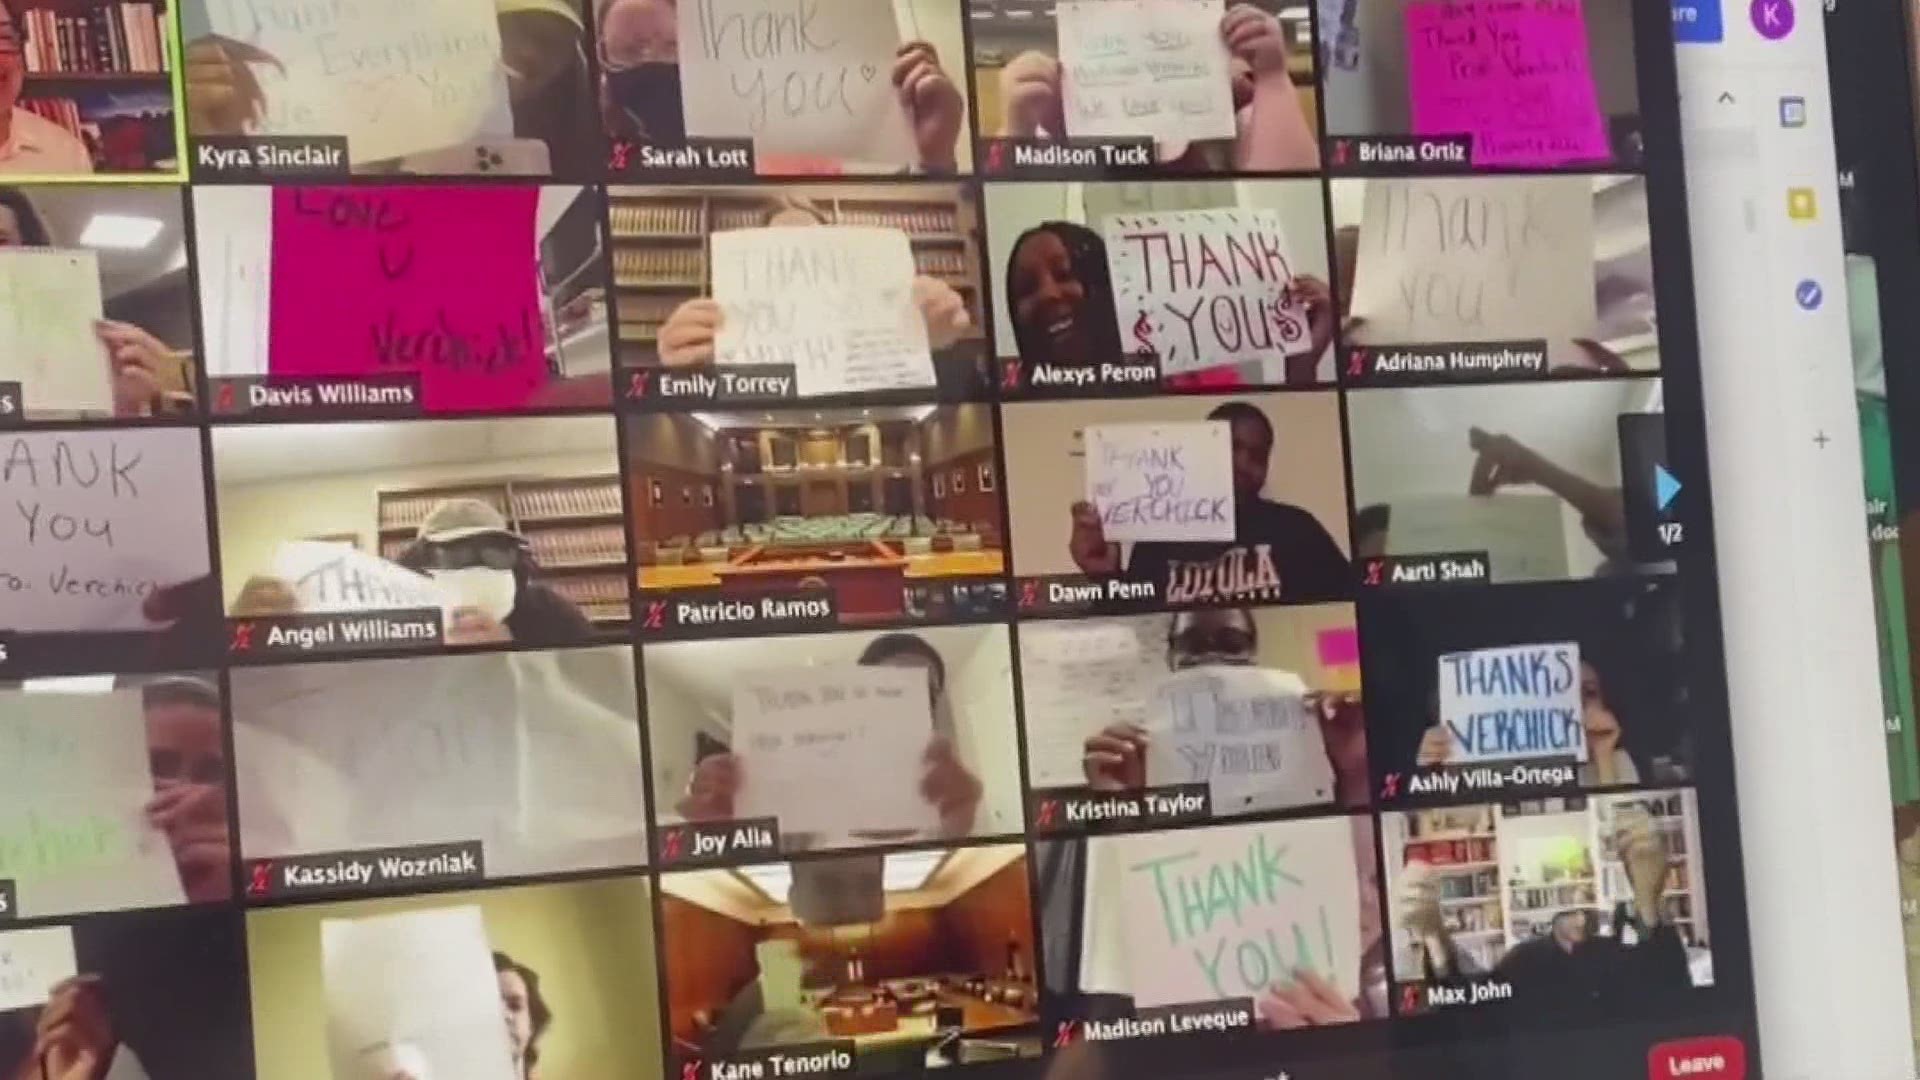 Loyola law students surprised their professor with a great virtual thank you.